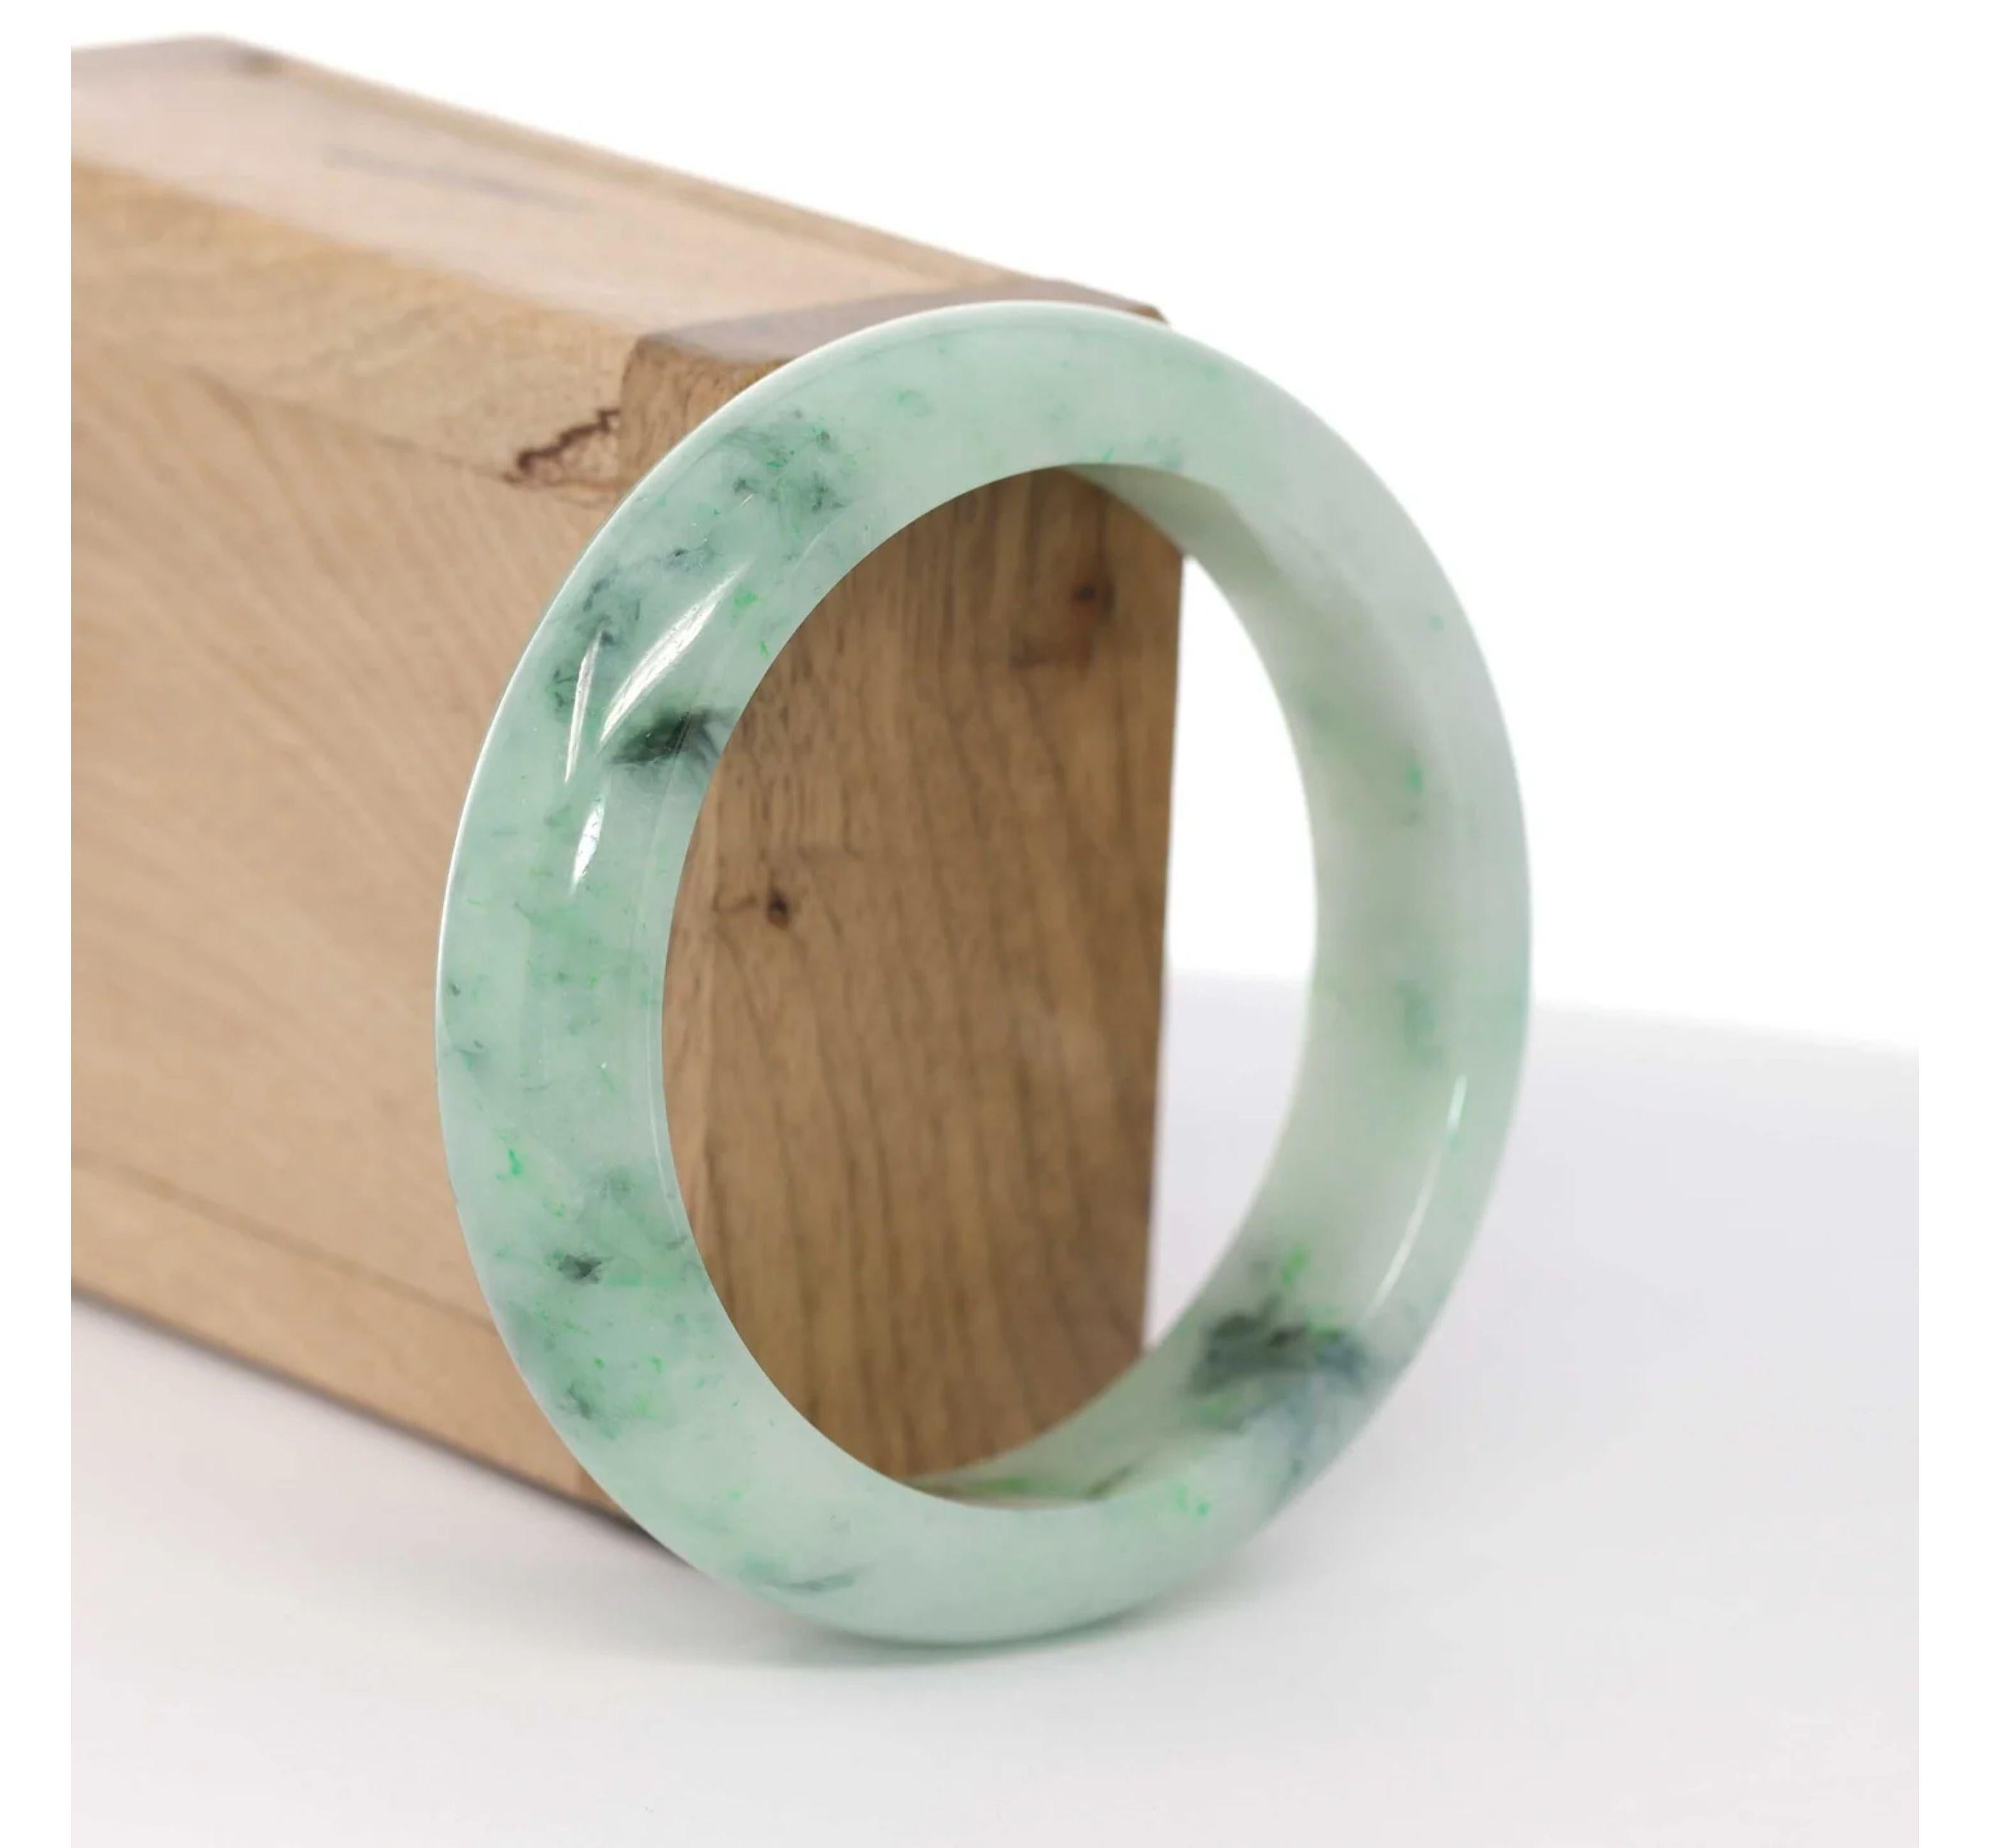 * INTRODUCTION--- Genuine Burmese Jadeite Jade Bangle Bracelet. This bangle is made with very high-quality genuine Burmese Jadeite jade; The jade texture is very smooth and translucent with green and dark green colors inside. This whole bangle is a